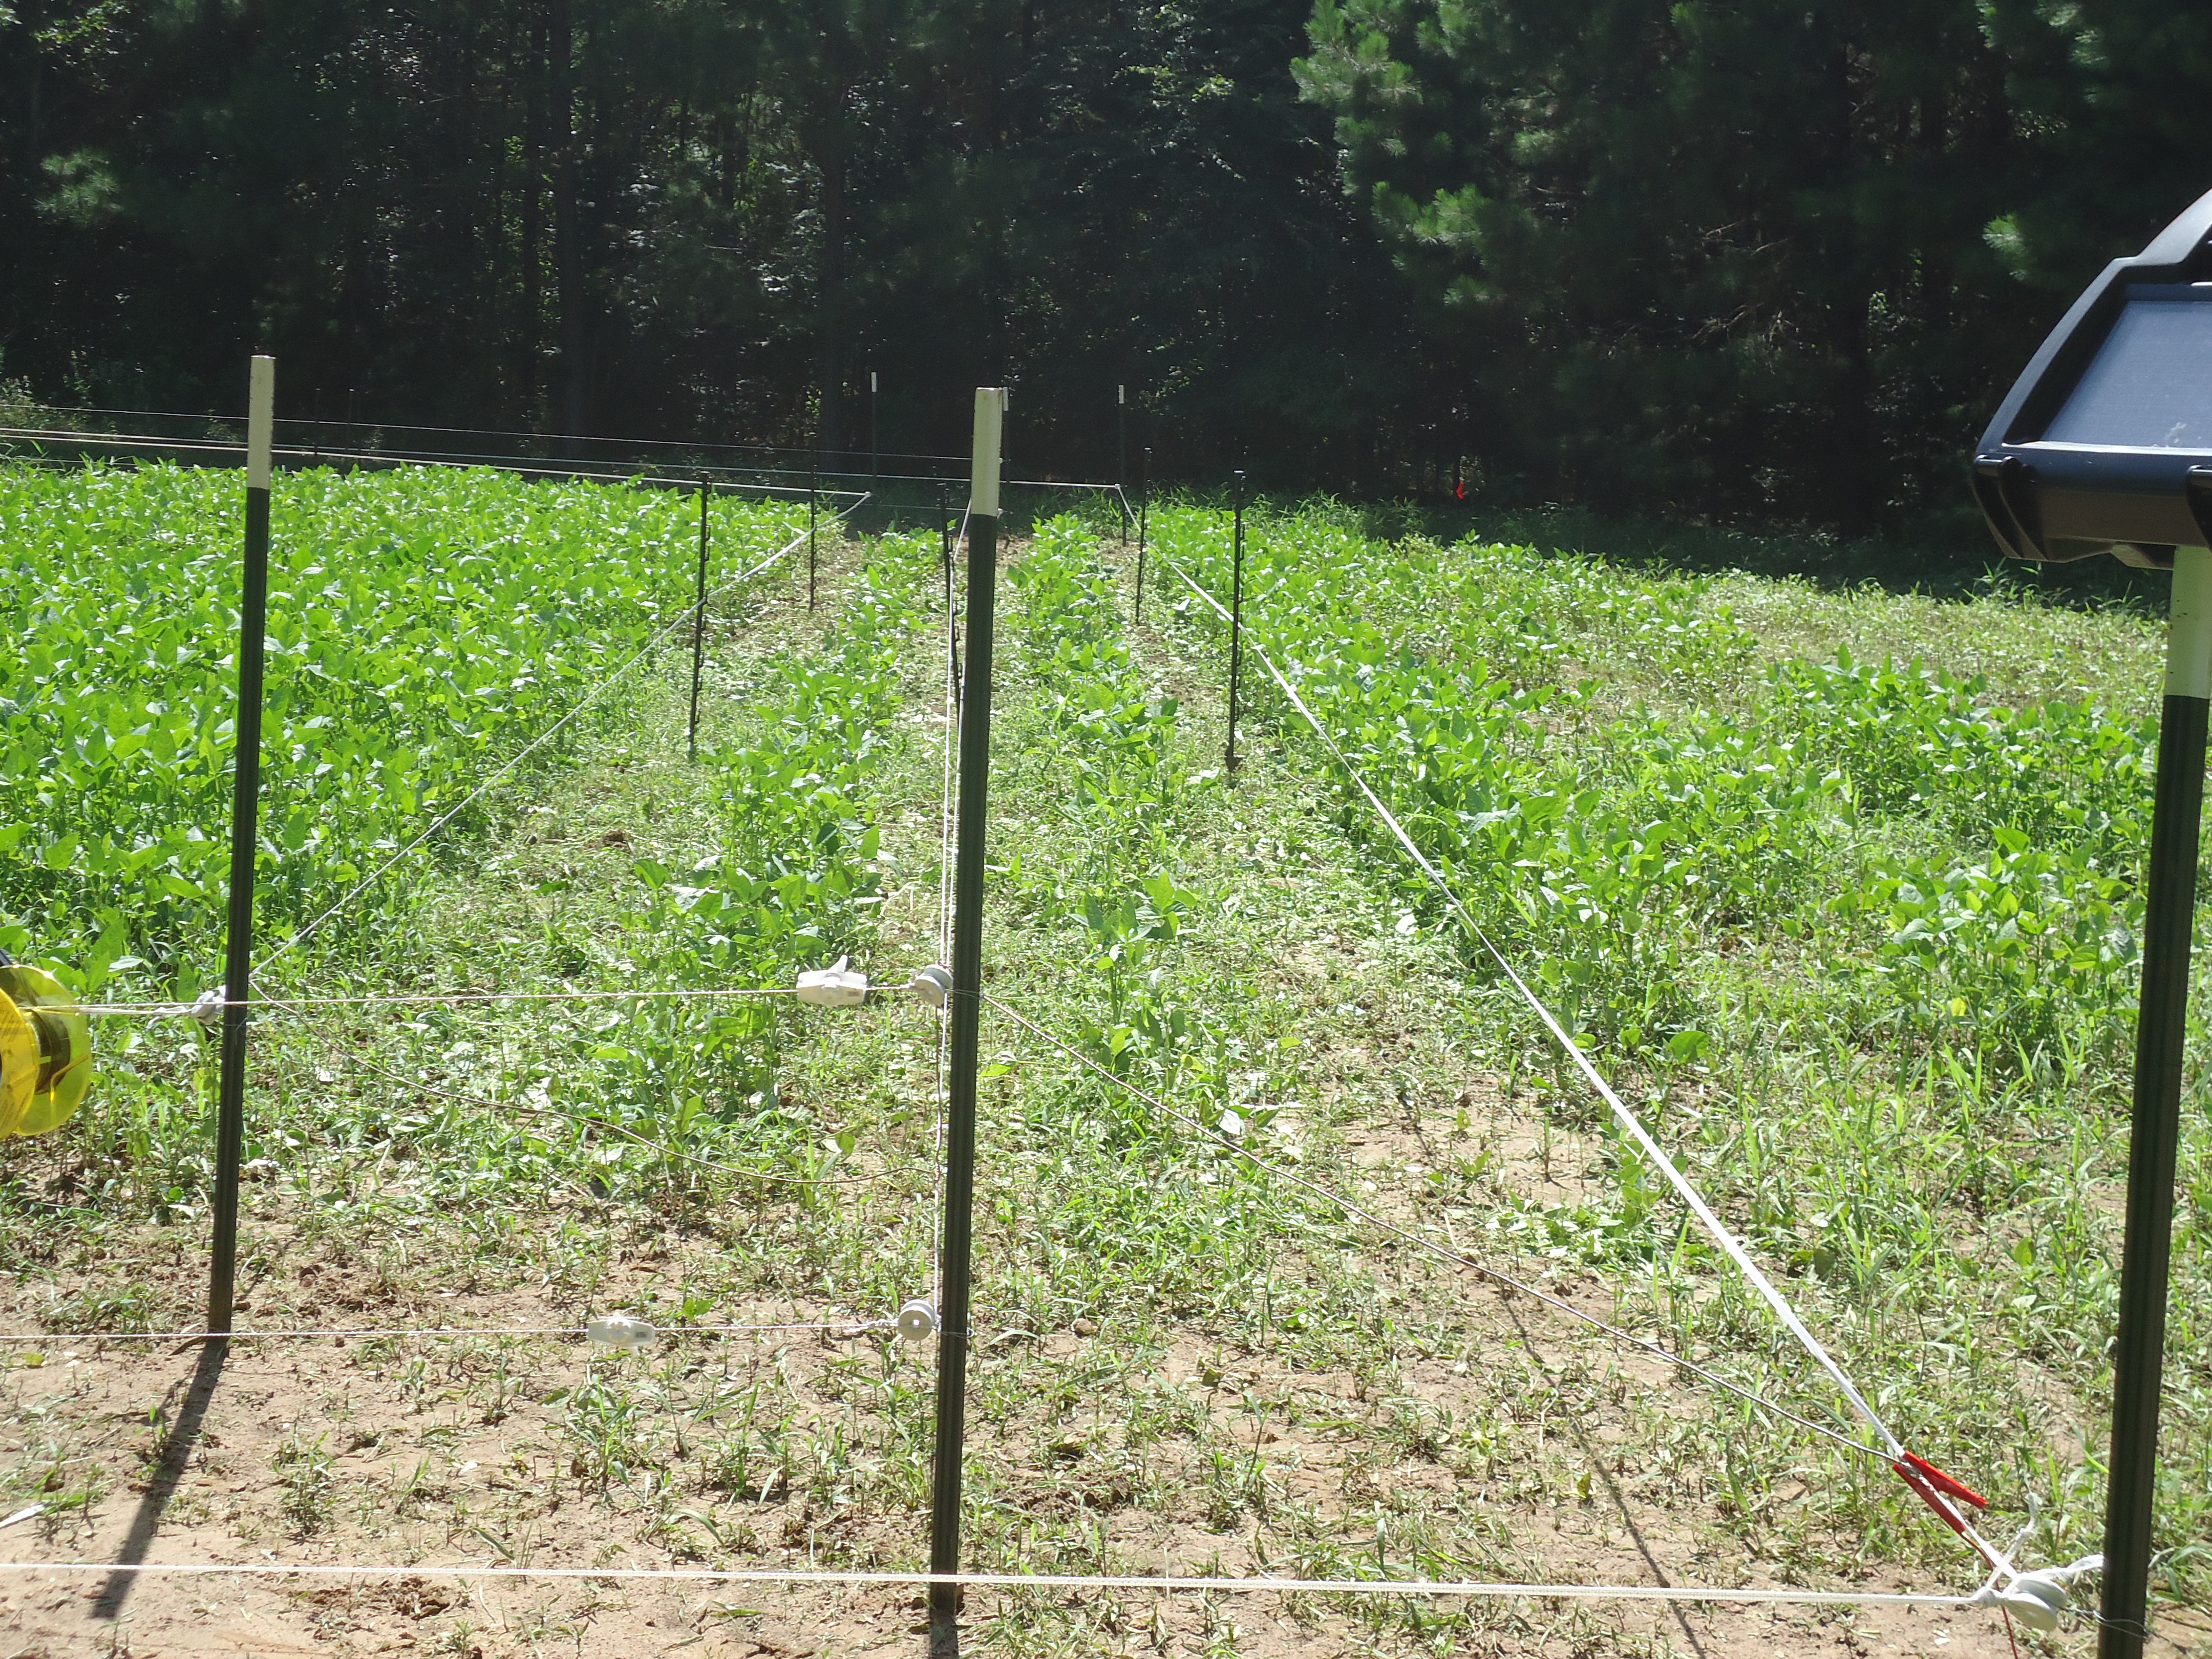 Four Wire Electric Fence System Best, How To Keep Deer Out Of Garden Electric Fence